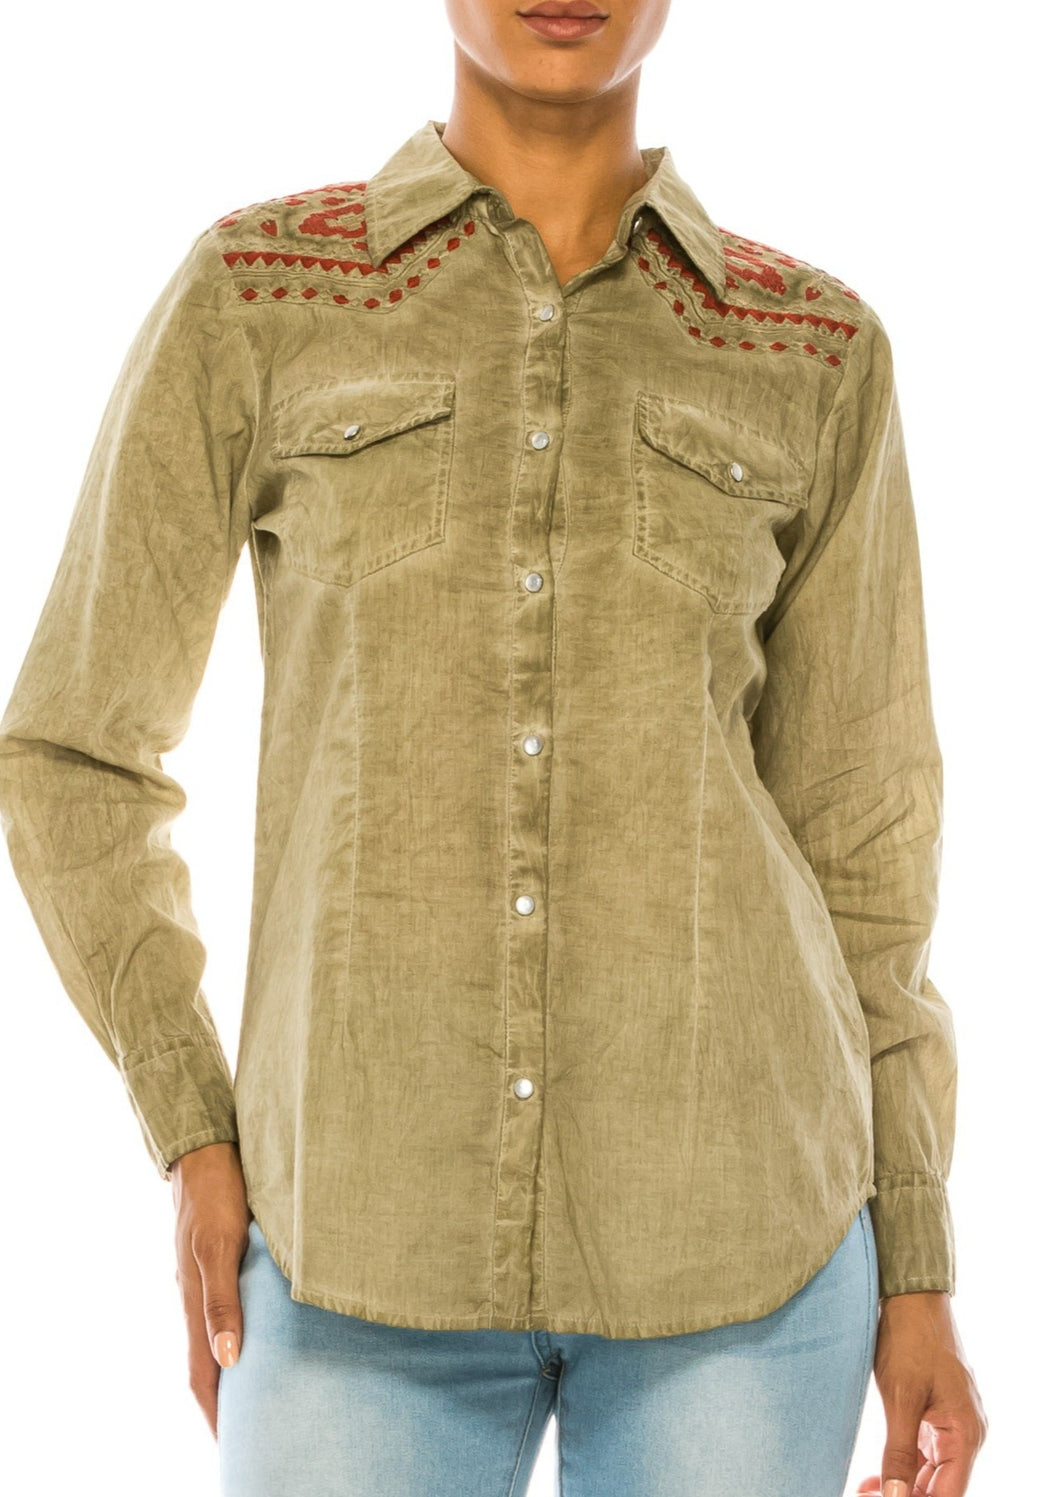 Santa Fe Embroidered Top